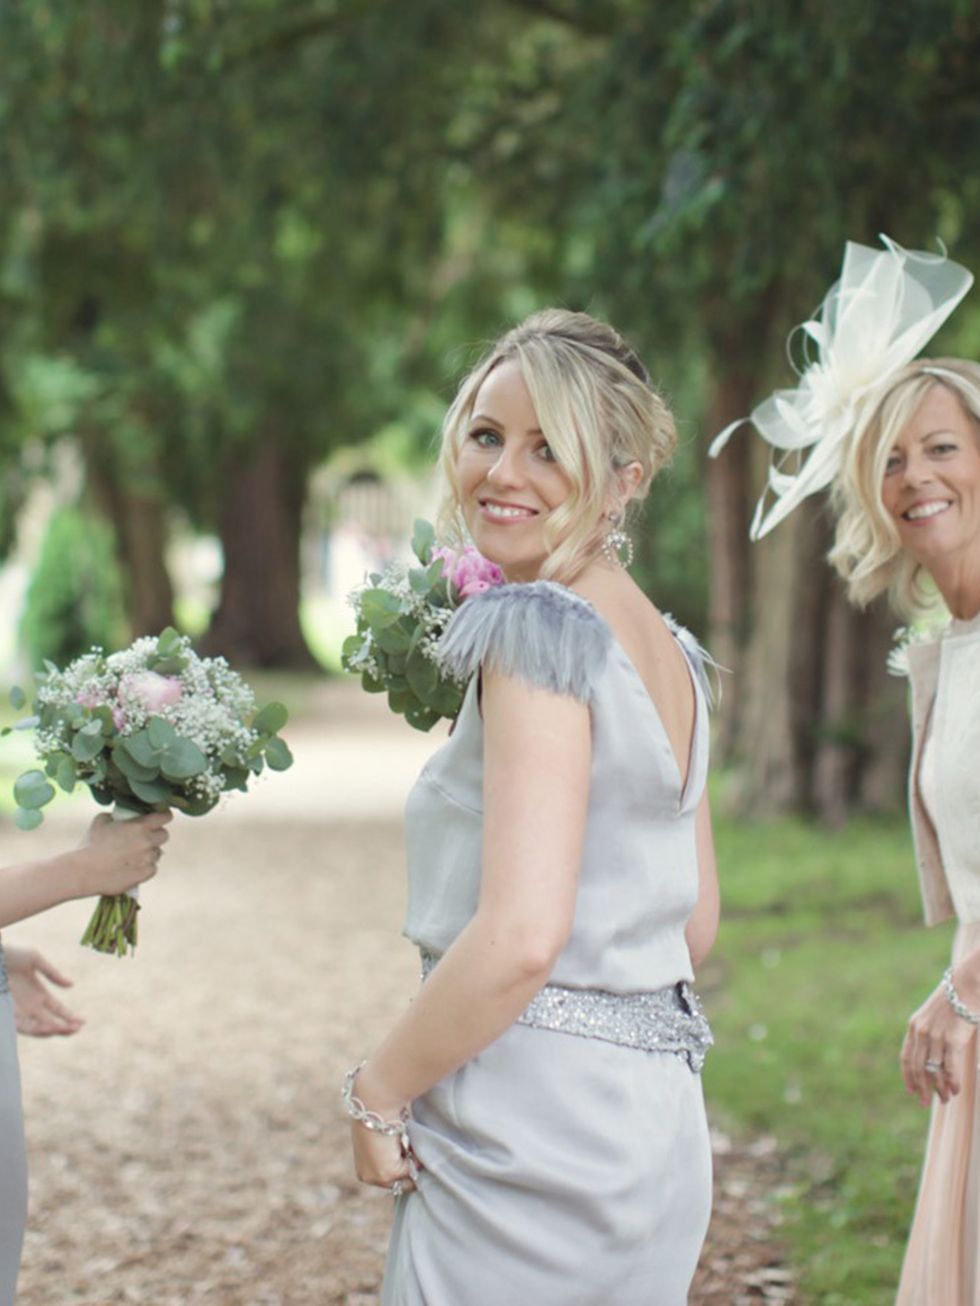 <p>My bridesmaids wore dresses created by designer <a href="http://www.foruminteriors.co.uk/amy-cook.html">Amy Cook</a>. They had a vintage art-deco look with capped feather sleeves, and were a beautiful dove grey.</p>